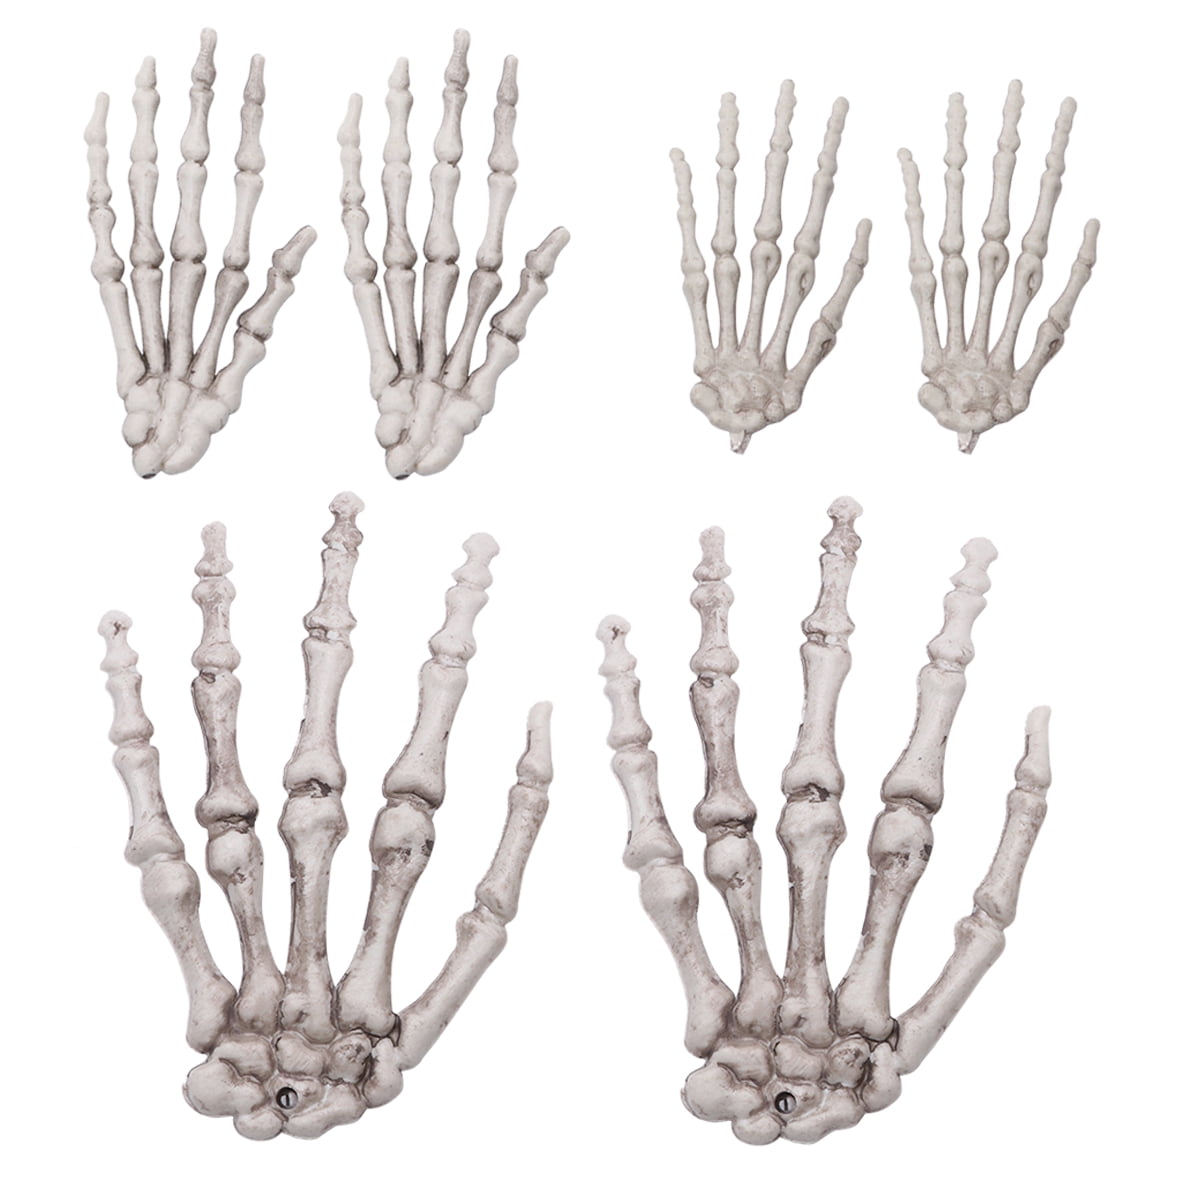 Halloween Party Garden Decoration Halloween Skeleton Hands Haunted House Props 1 Pair Realistic Life Size Severed Skeleton Hands for Home Decoration Halloween Props Decorations Beige 